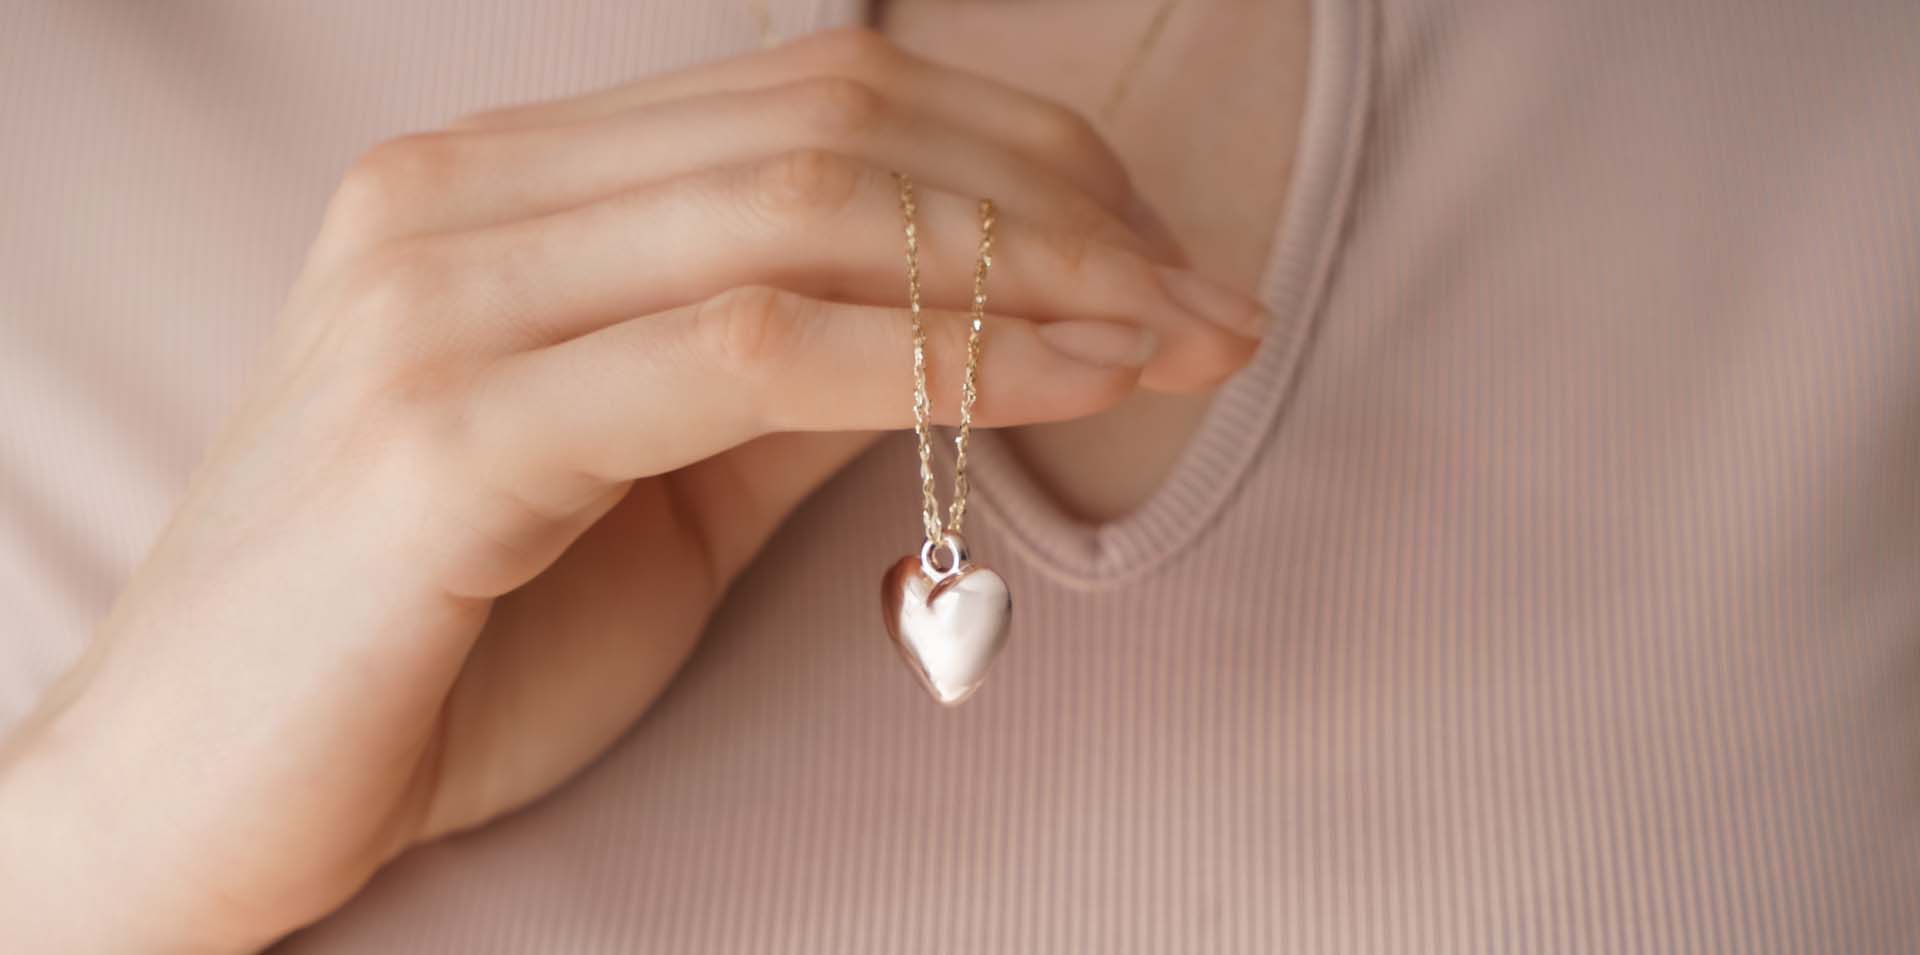 Closeup of woman displaying a gold heart necklace: Telephone number 1-877-872-9909